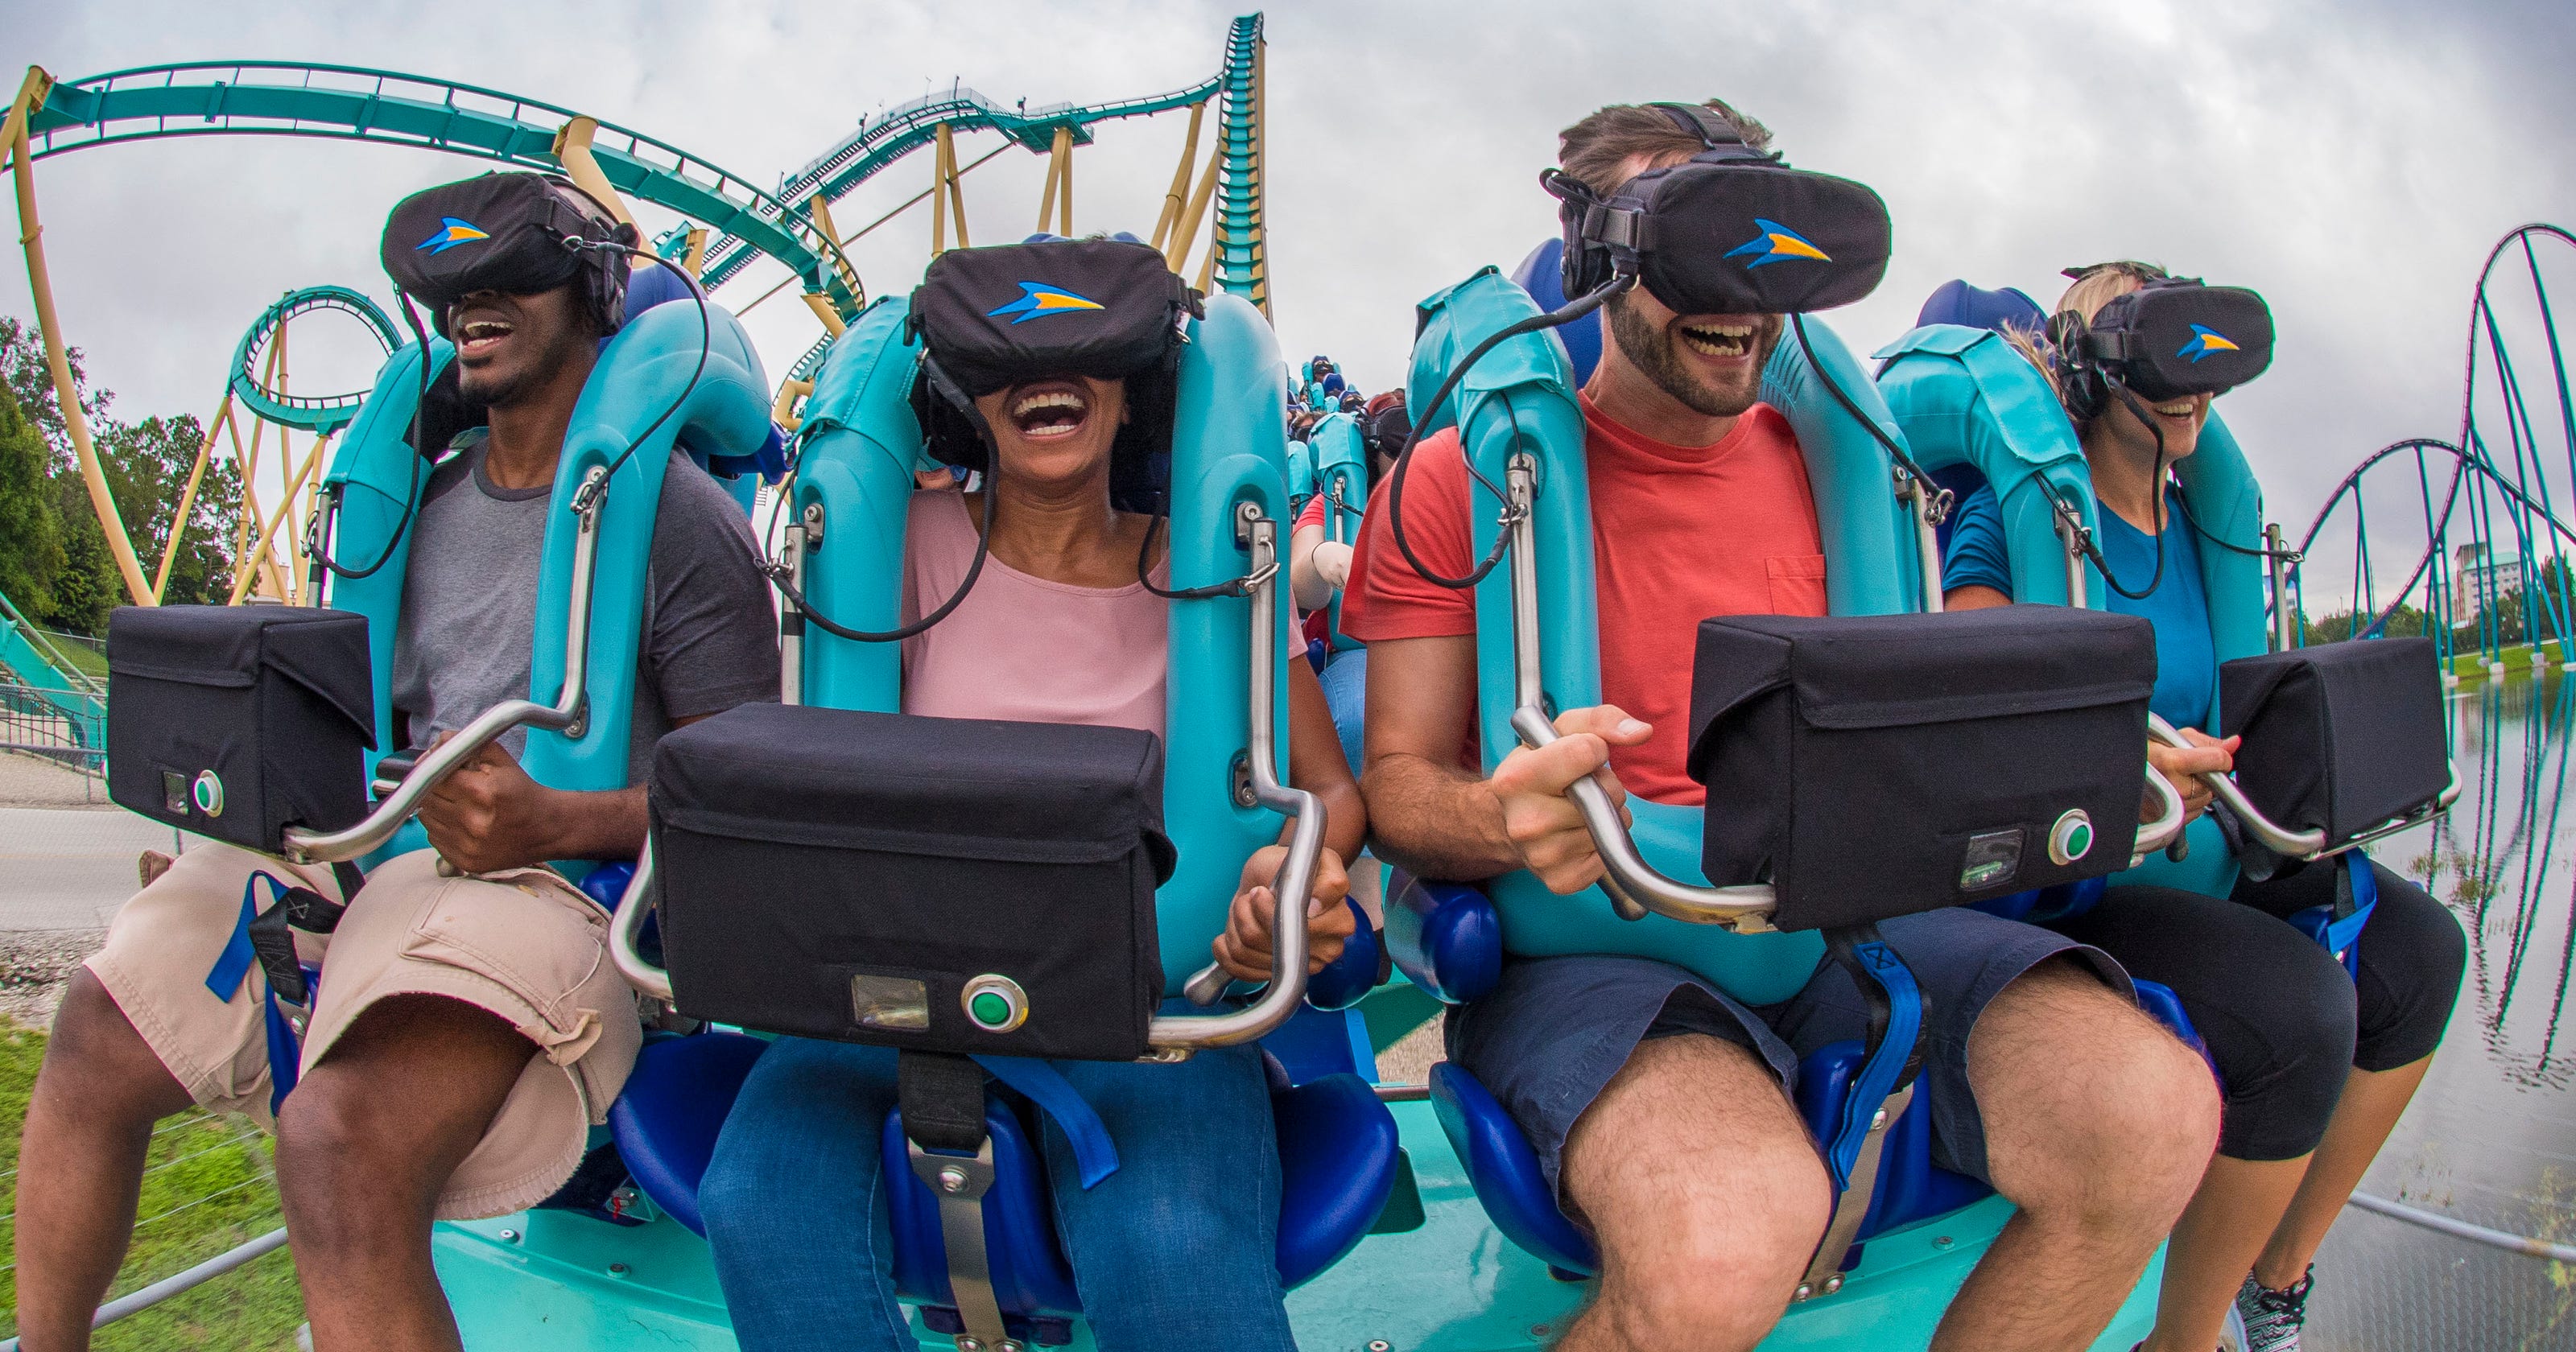 Virtual reality: VR tech added to theme park attractions